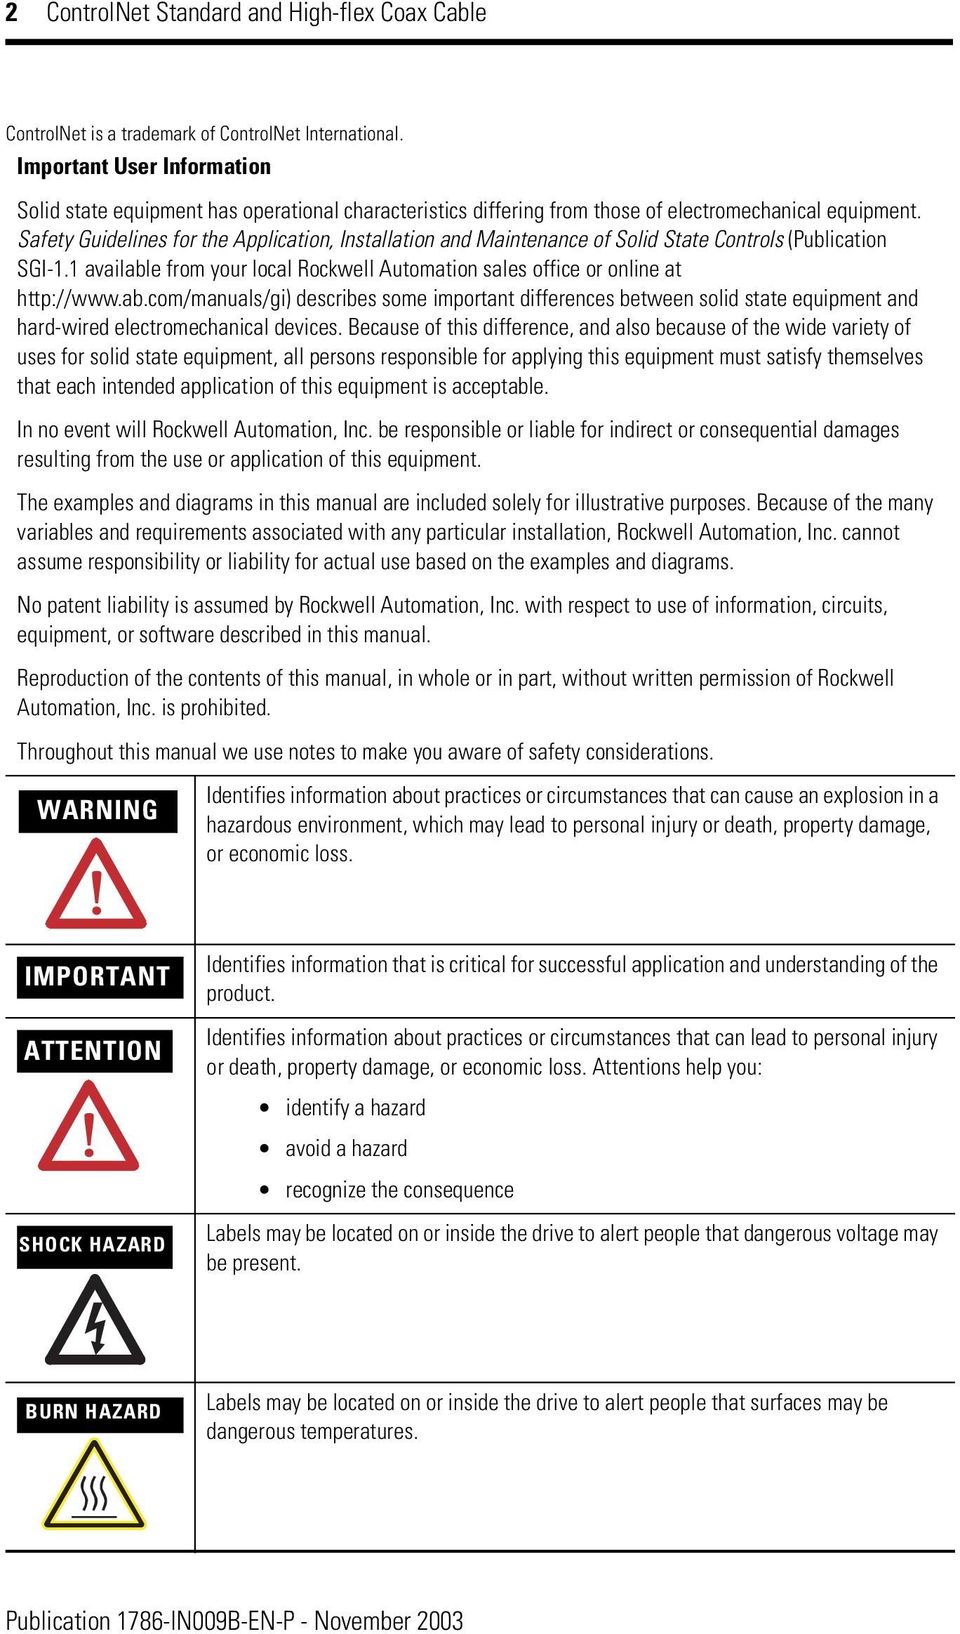 Safety Guidelines for the Application, Installation and Maintenance of Solid State Controls (Publication SGI-1.1 availabl